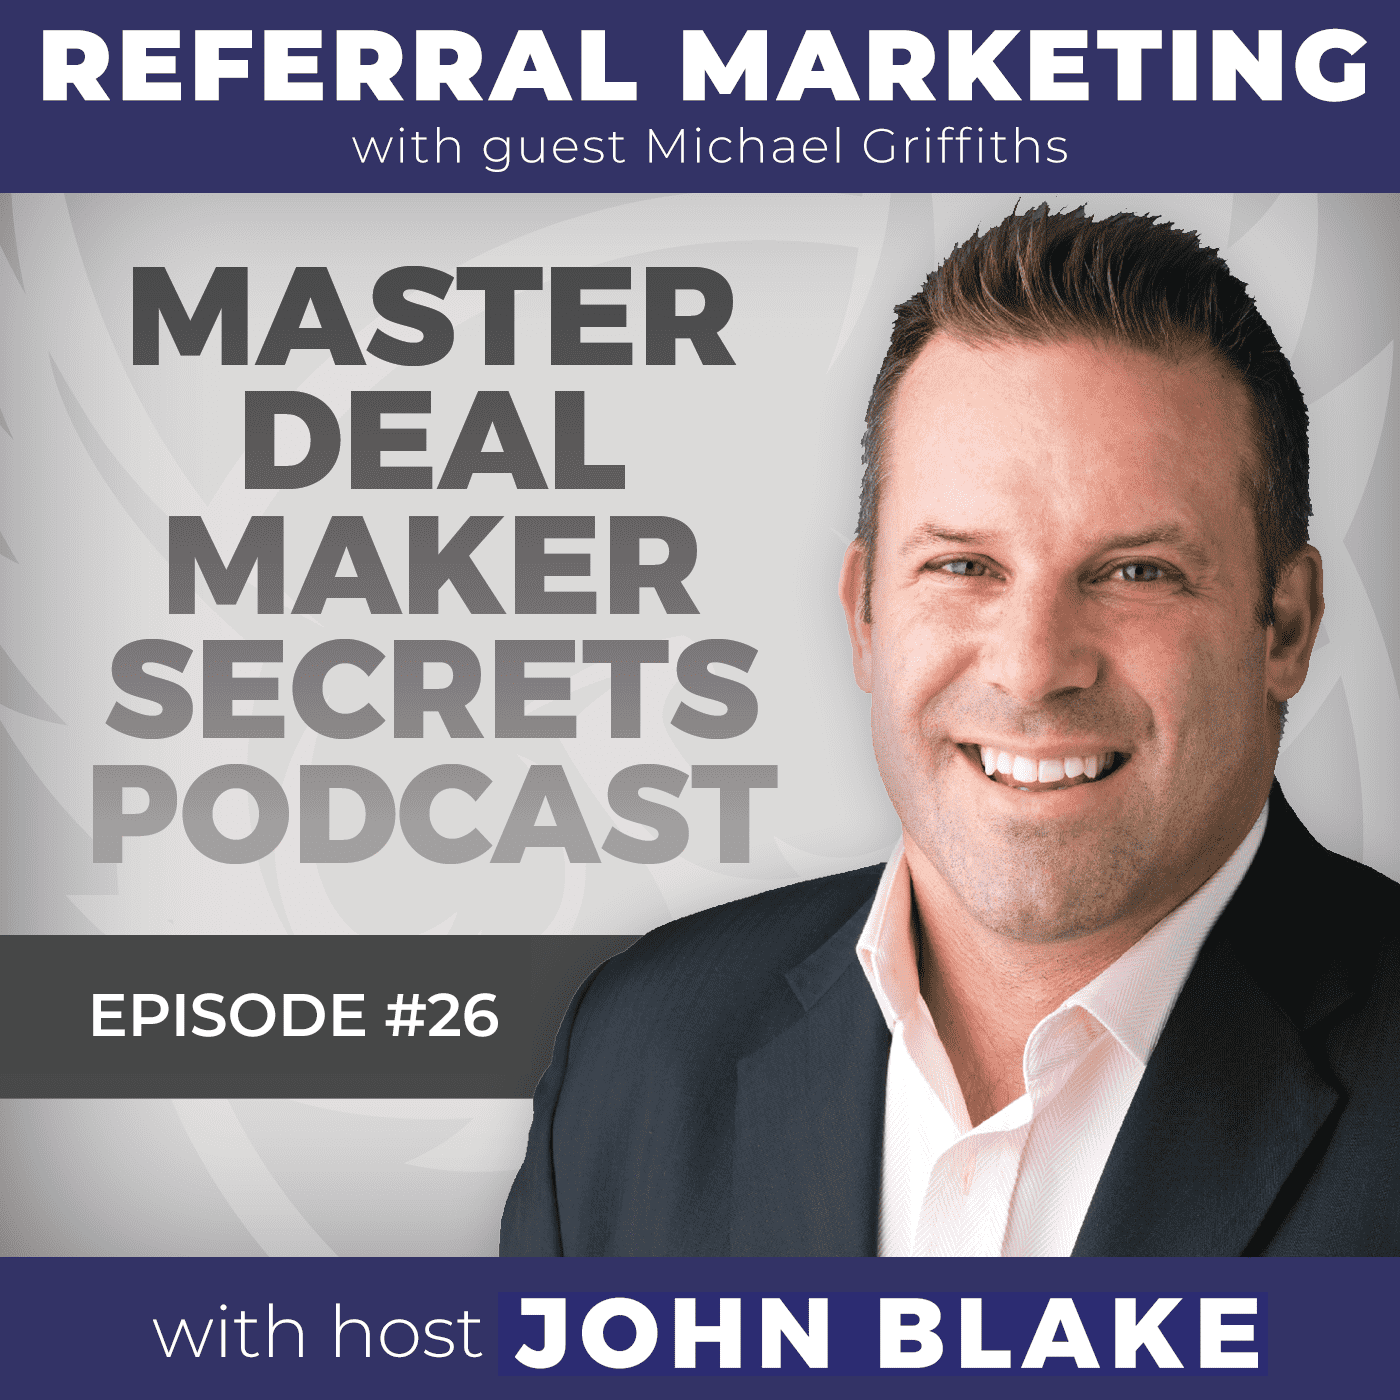 Referral Marketing with Guest Michael Griffiths